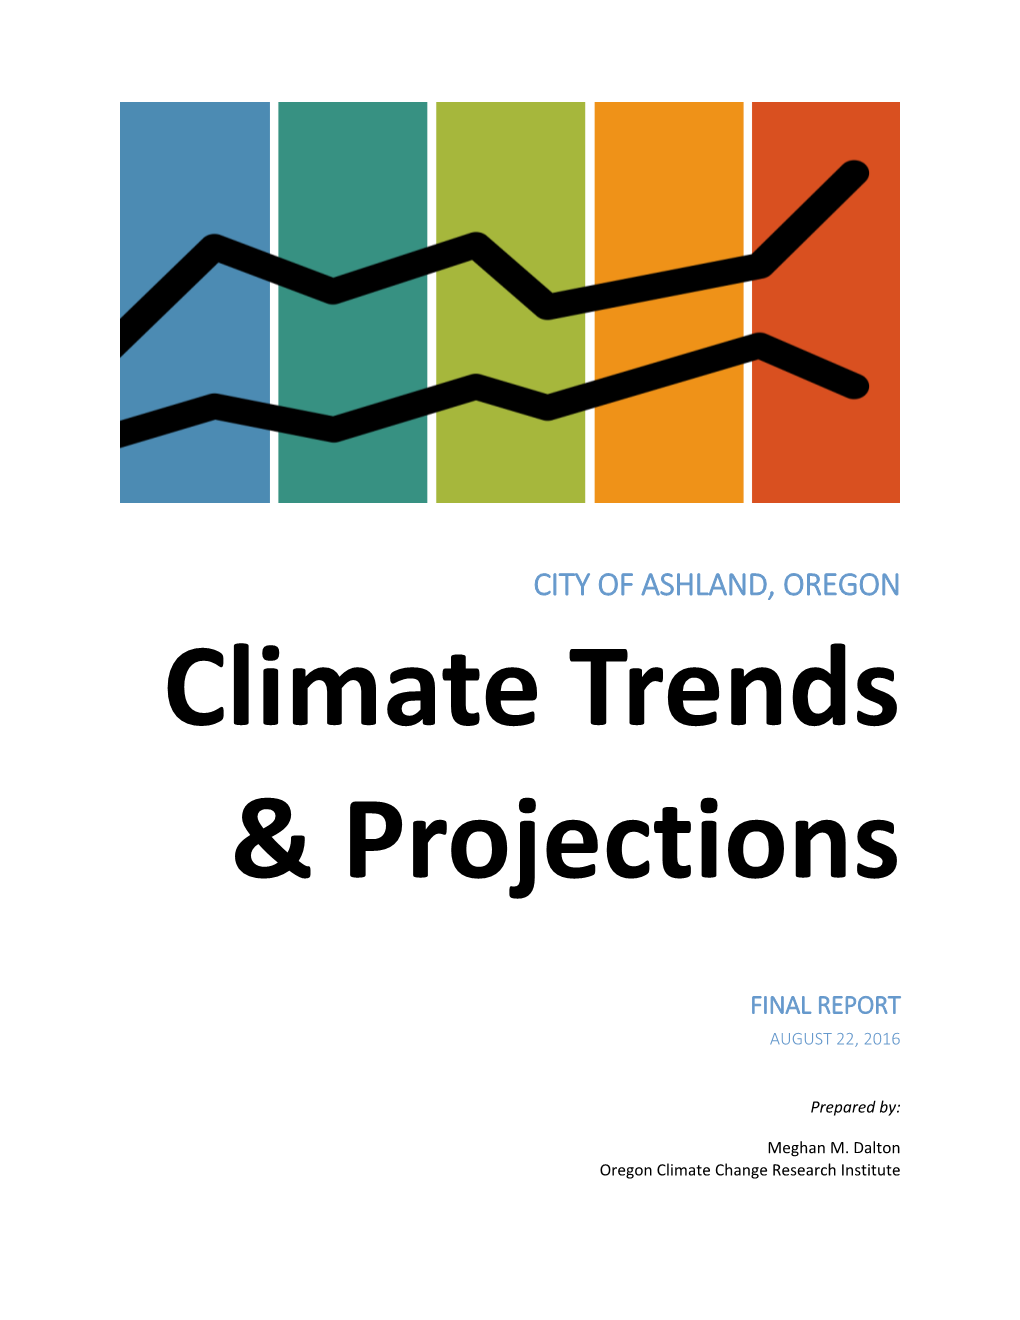 City of Ashland Climate Trends and Projections